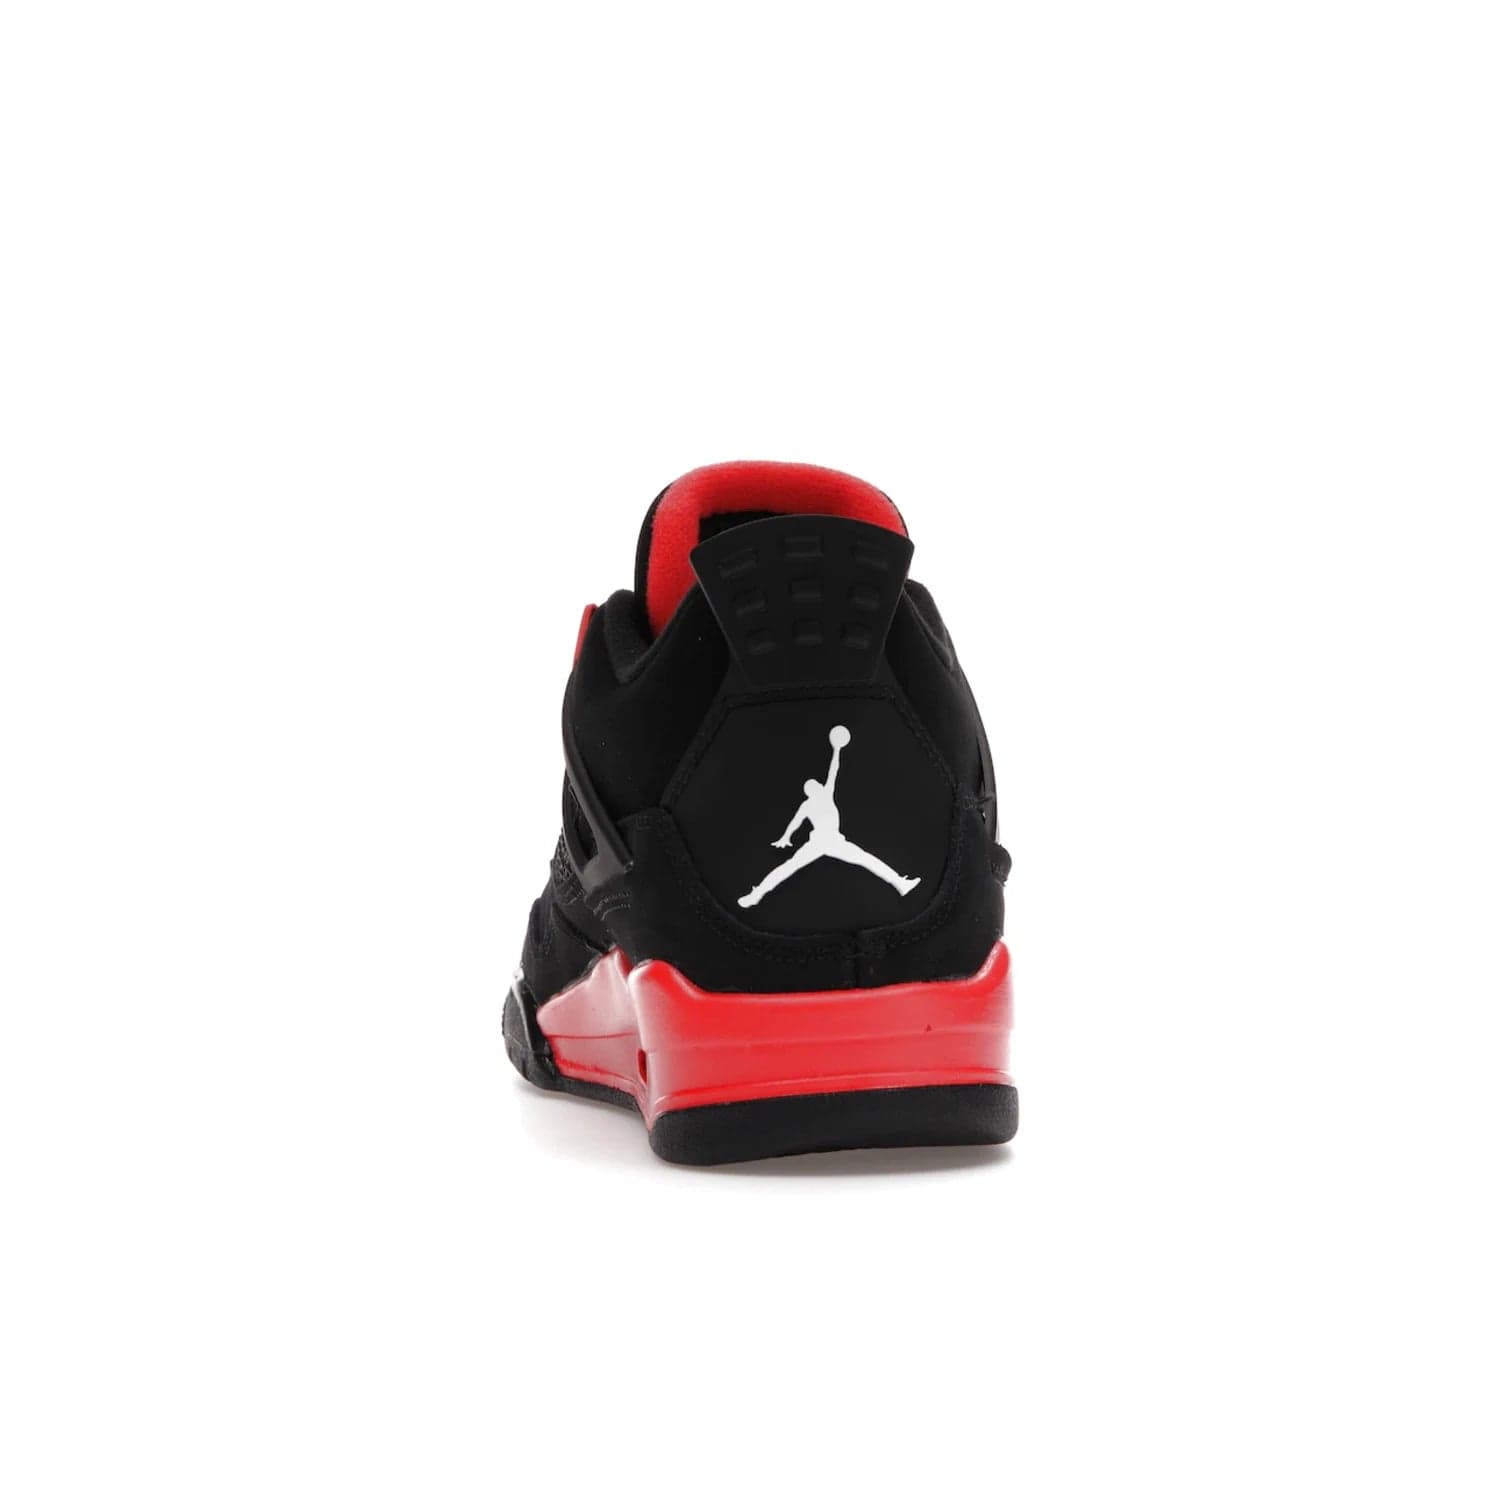 Jordan 4 Retro Red Thunder (GS) - Image 27 - Only at www.BallersClubKickz.com - The Air Jordan 4 Retro Red Thunder GS features a stylish black and crimson upper with a Jumpman logo. Athletic midsole with Air bubbles for cushioning and black rubber outsole with iconic motif complete this classic sneaker.